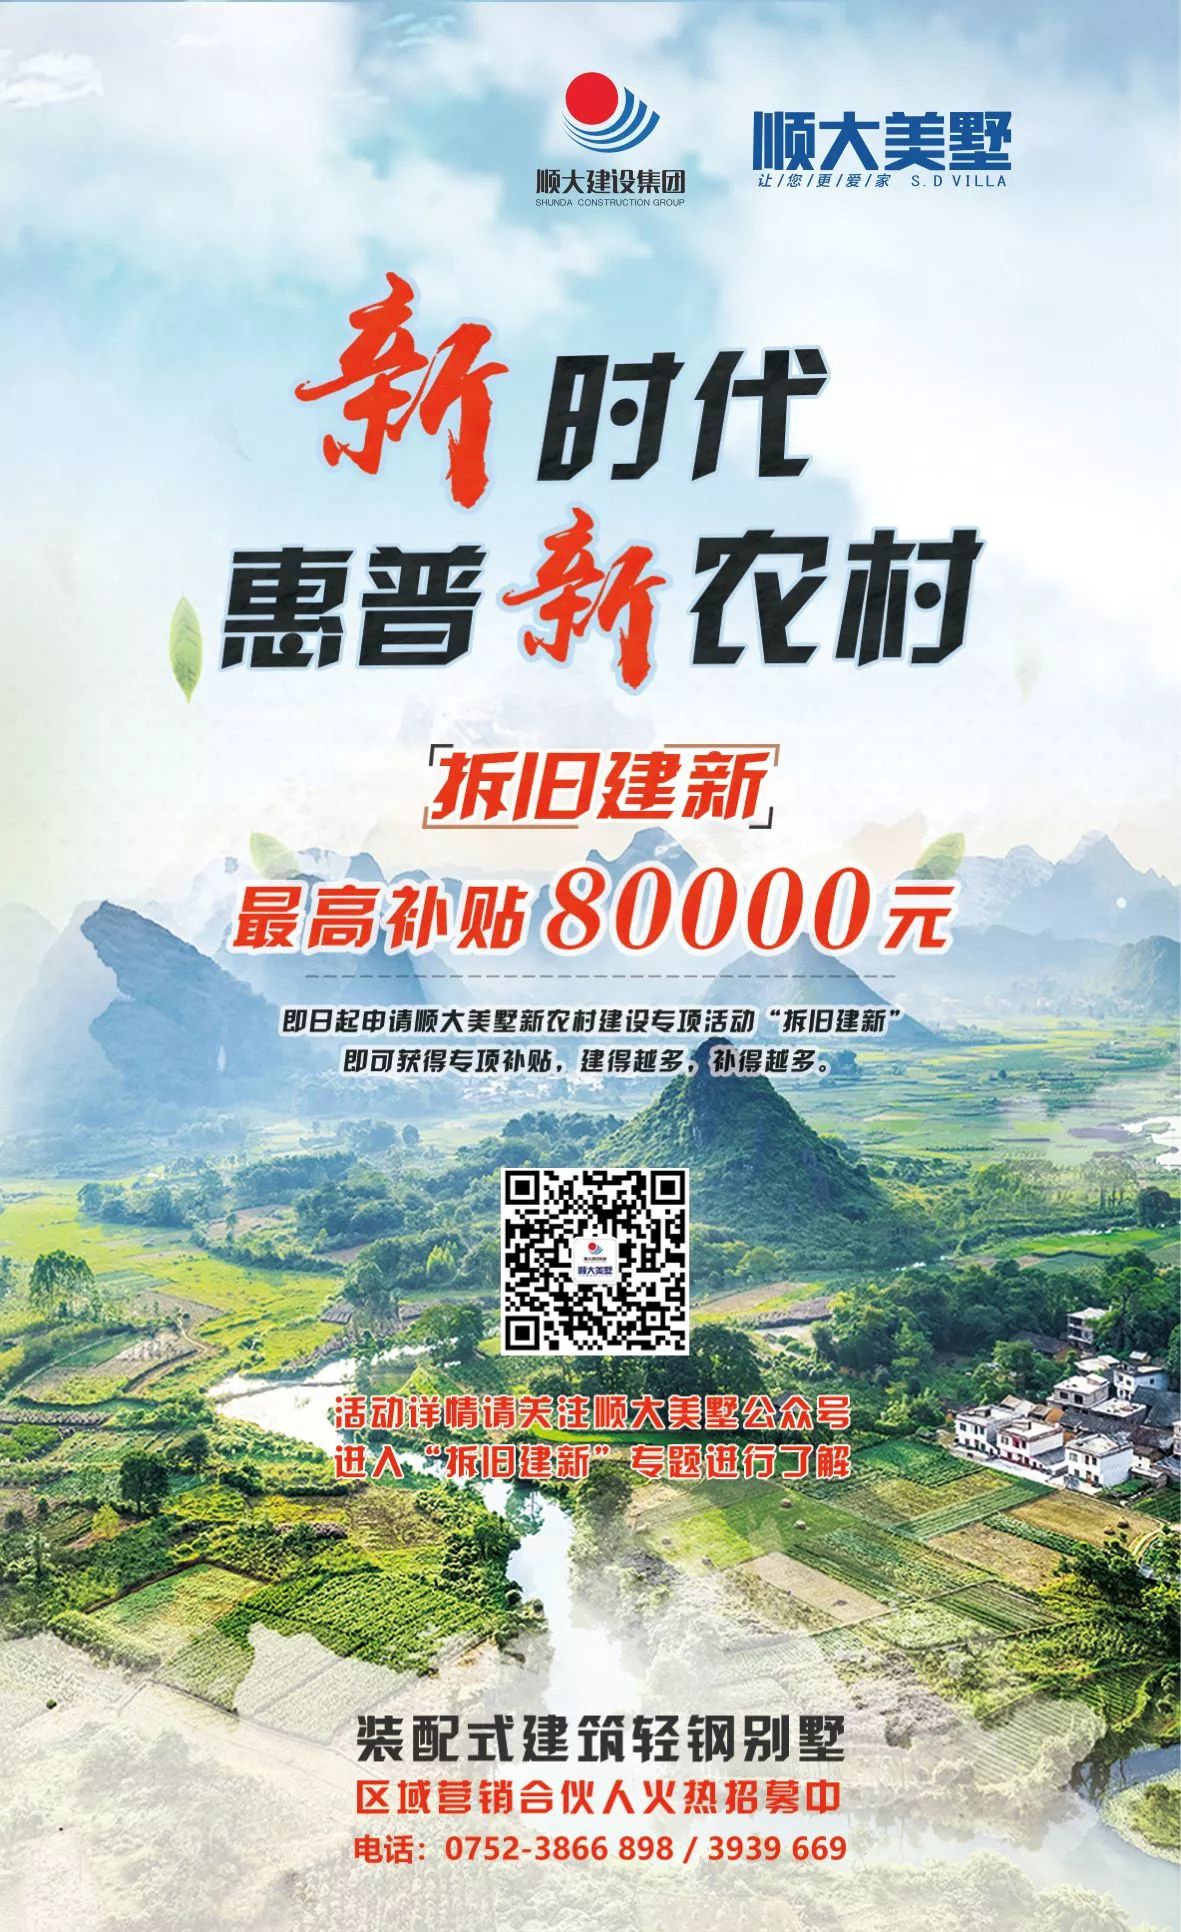 New era, HP new countryside, the highest subsidy of 80,000 yuan